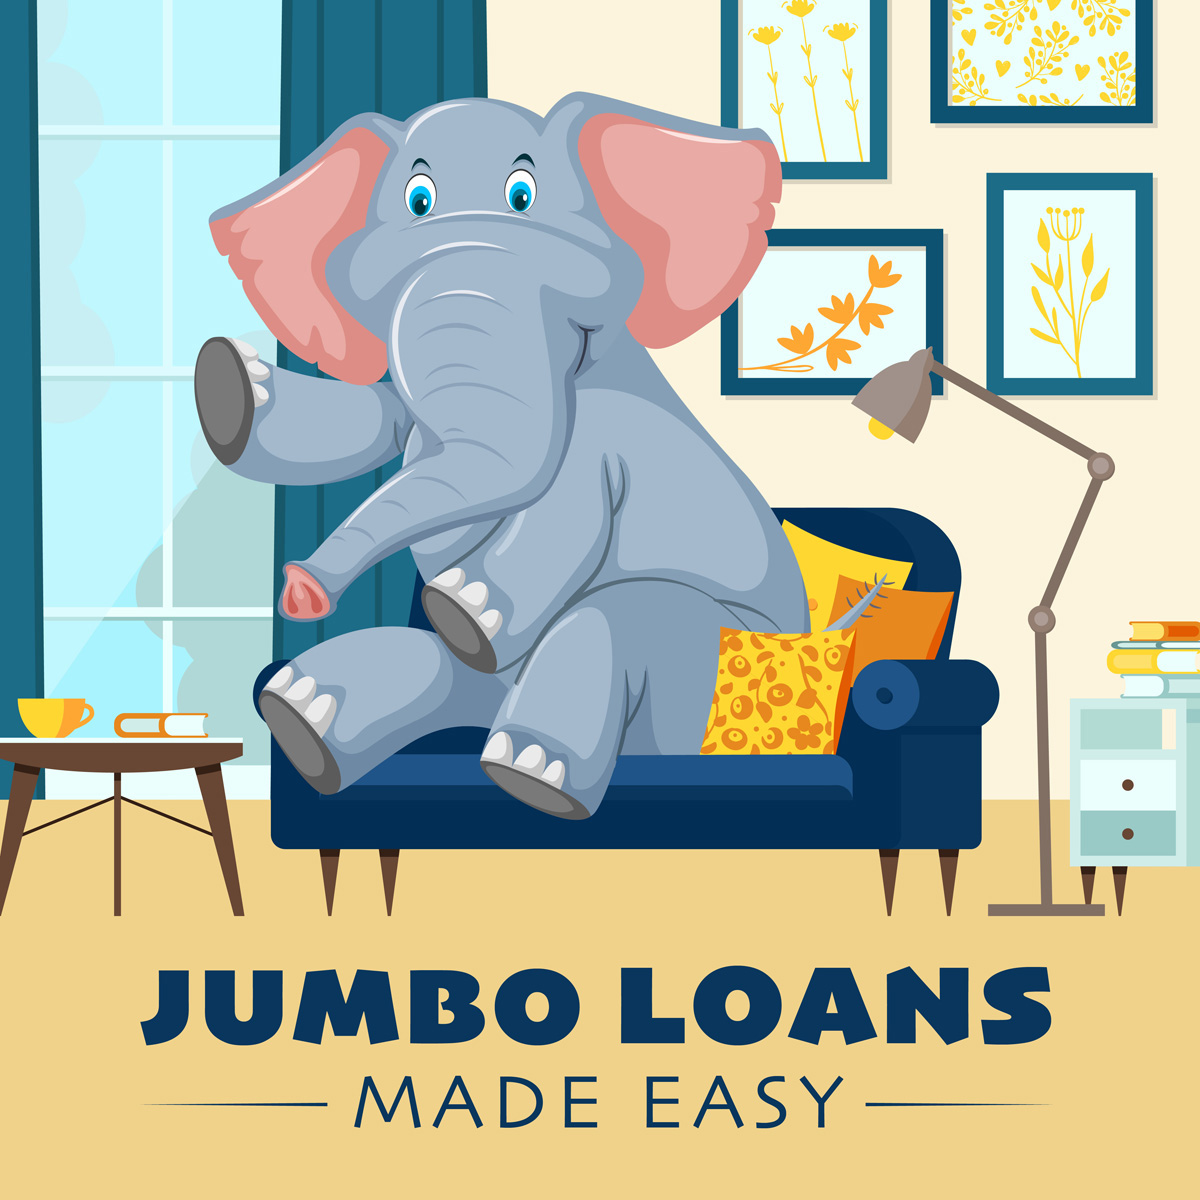 NJ & NY Jumbo loans are no longer the elephant in the room. With higher loan amounts and lower down payment options, our Jumbo program will be a huge hit with your clients. Call Ted at 877-539-1697! #njmortgage #nymortgage #njrealtor #nyrealtor #rentalproperty #investrealestate